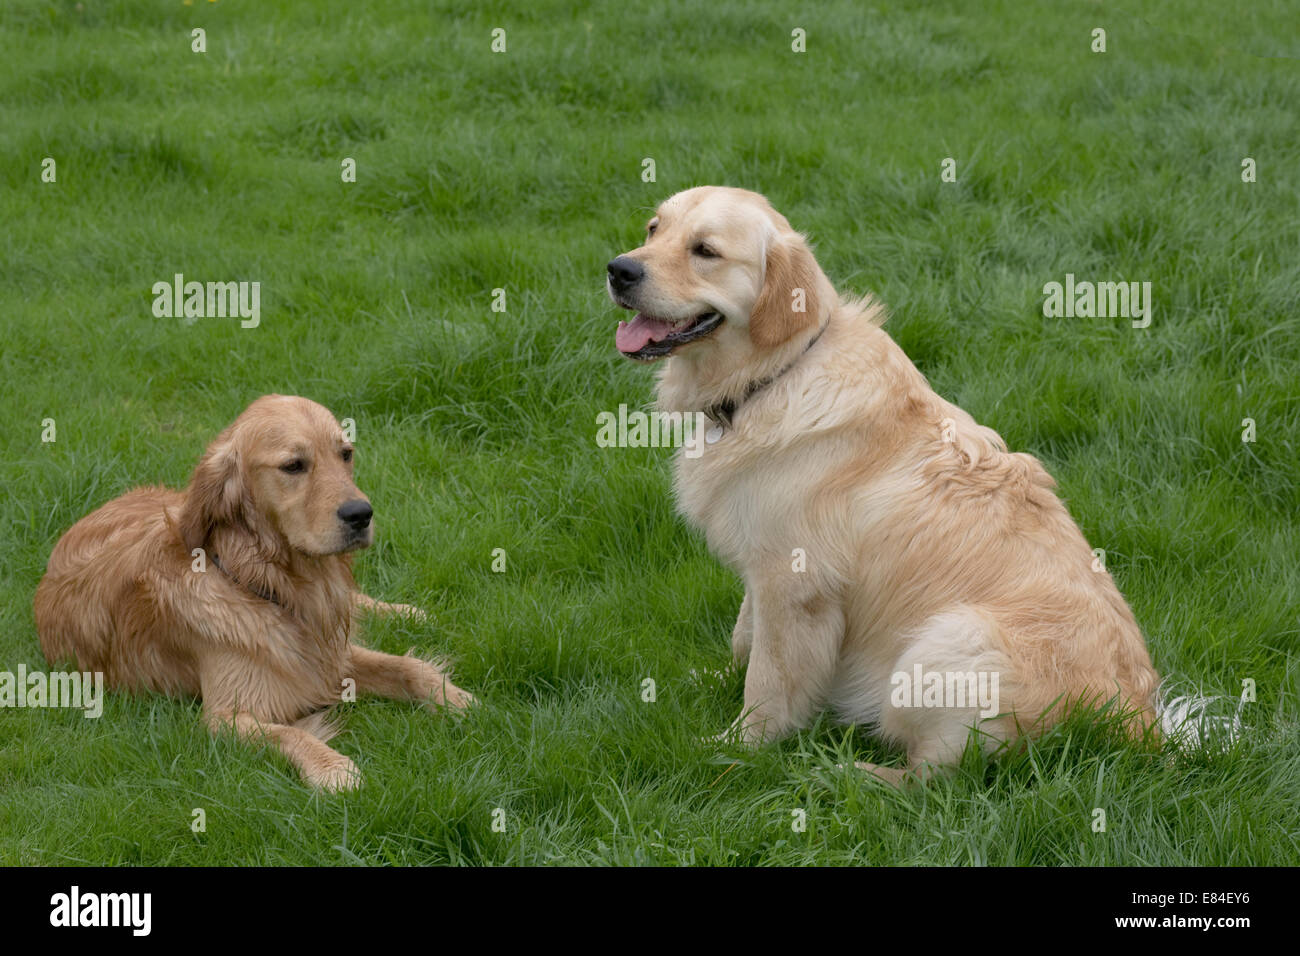 Reunited High Resolution Stock Photography and Images - Alamy